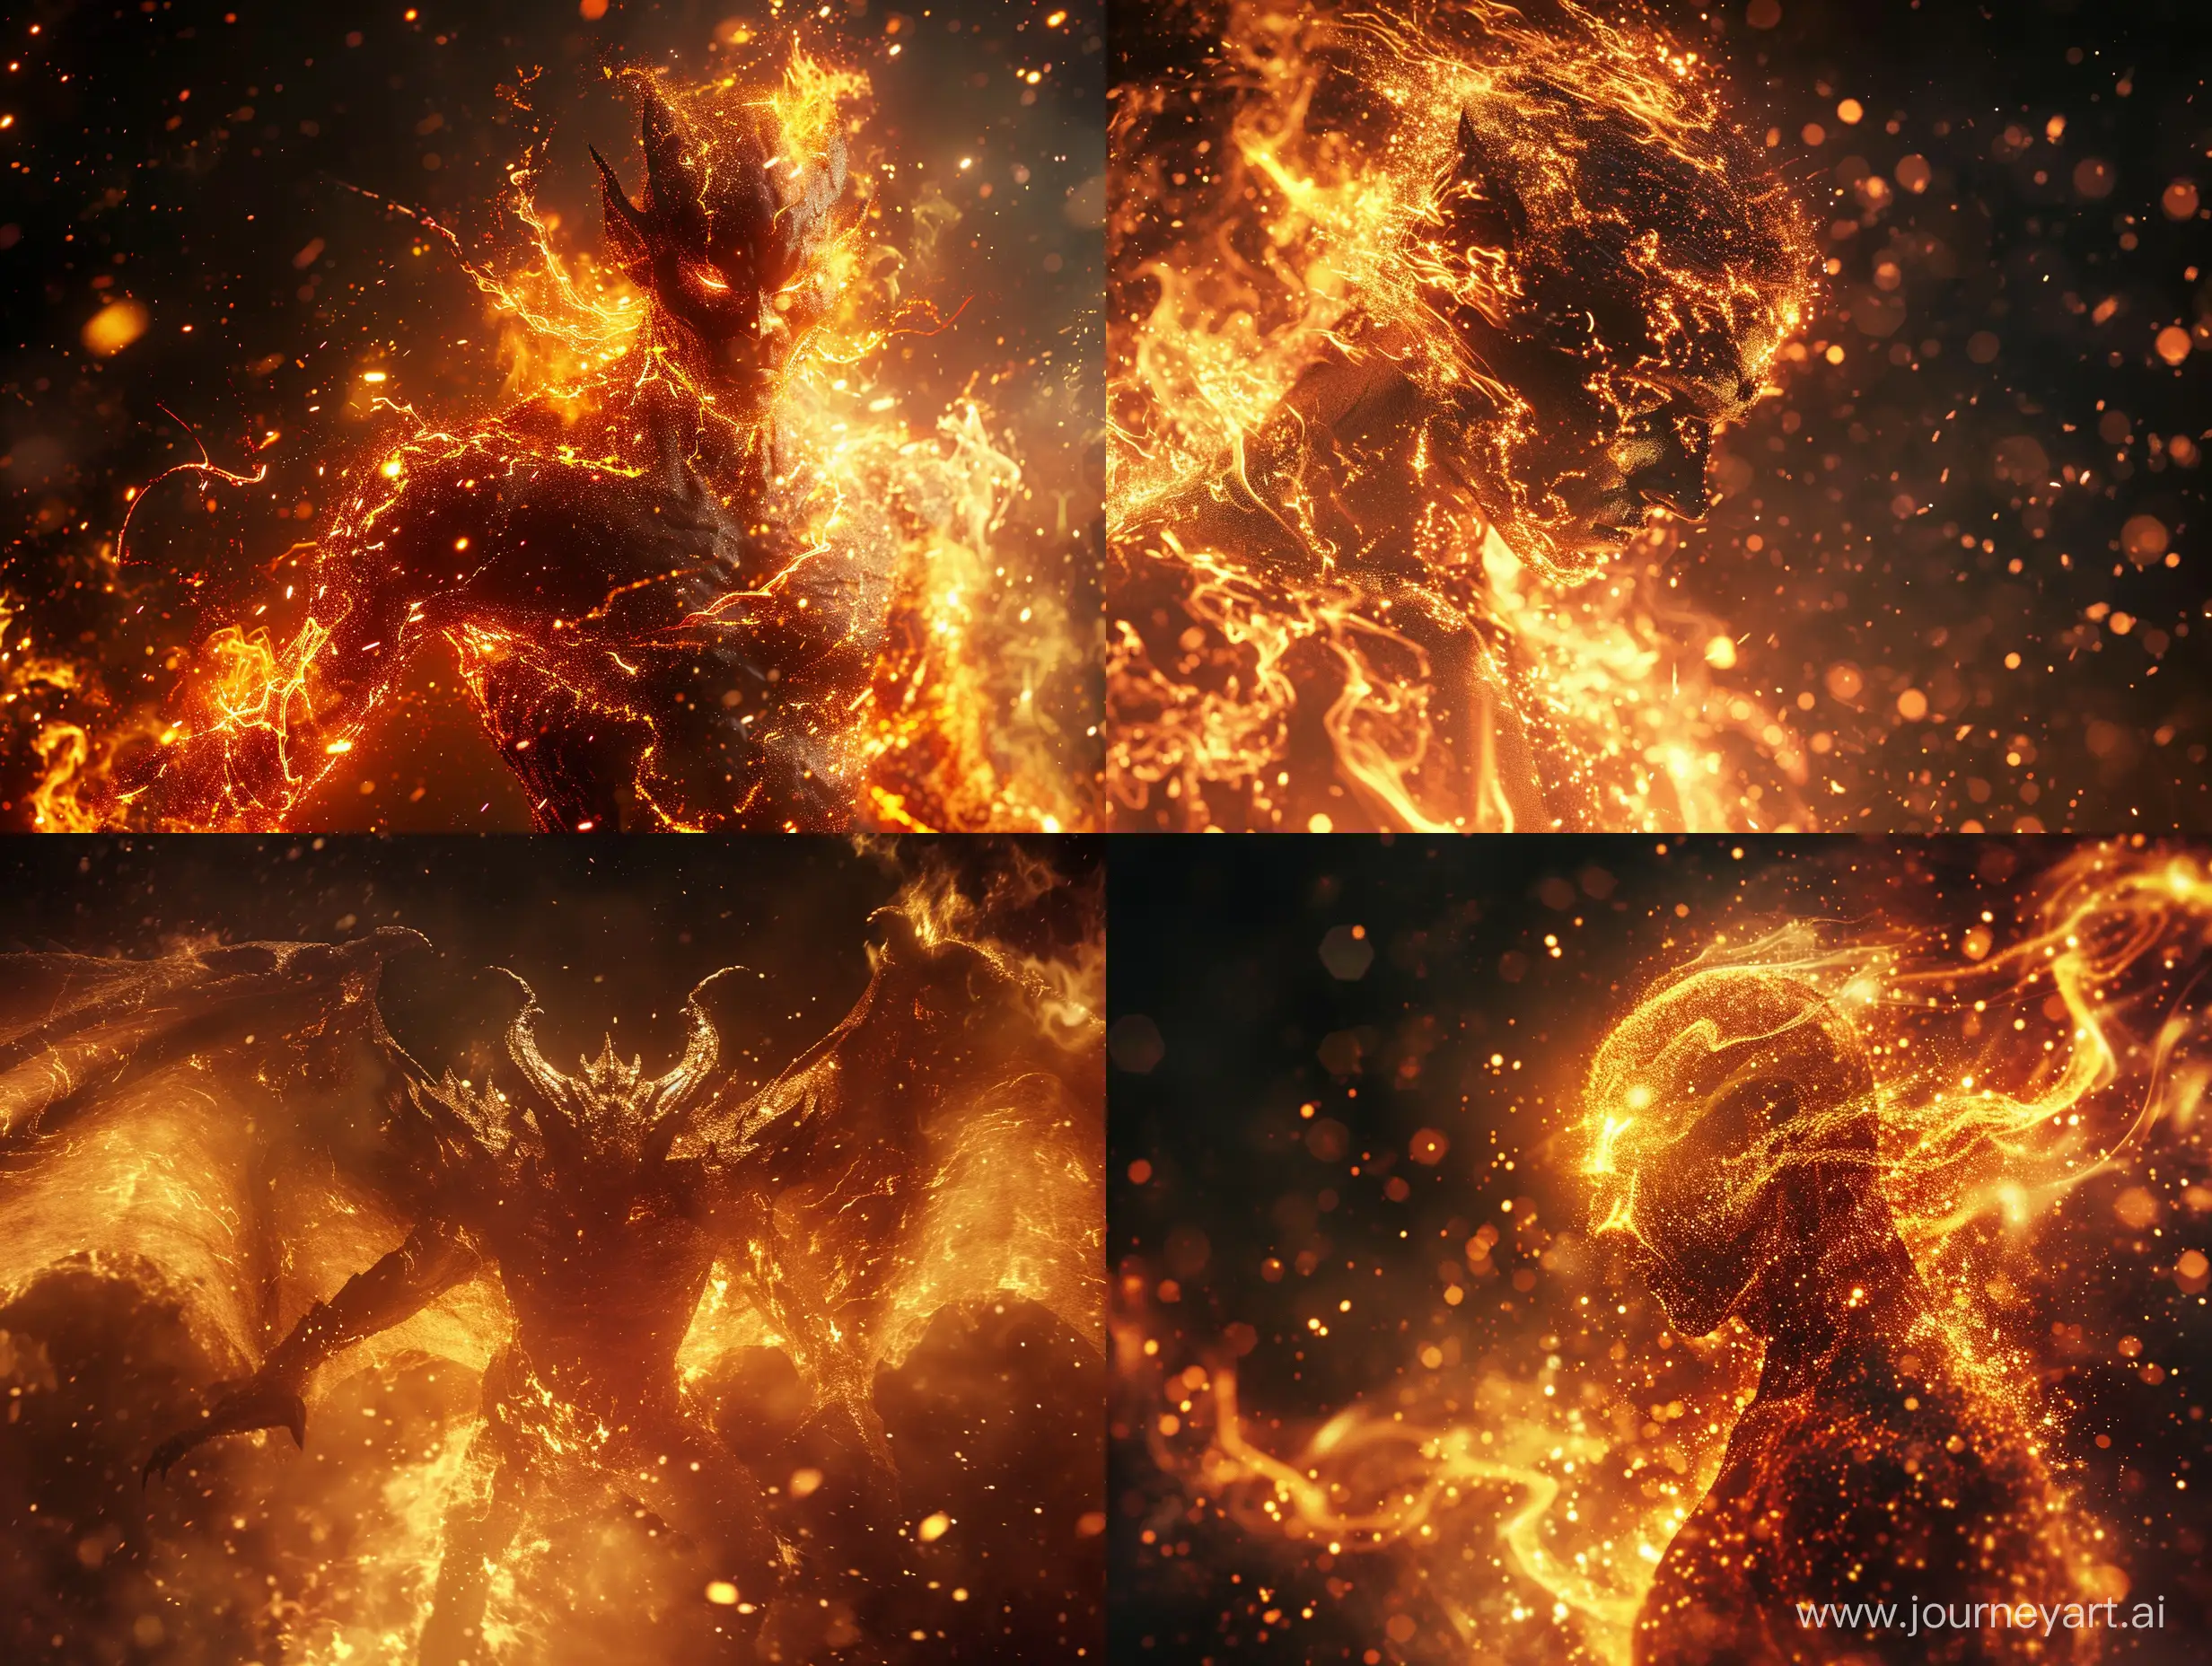 The Hell DemonImagine a creature of the underworld, a hell demon imbued with the vivid and volatile allure of fire particles. This widespread apparition is not only terrifying but also entrancing, its gleaming form captured through a high-quality DSLR camera.